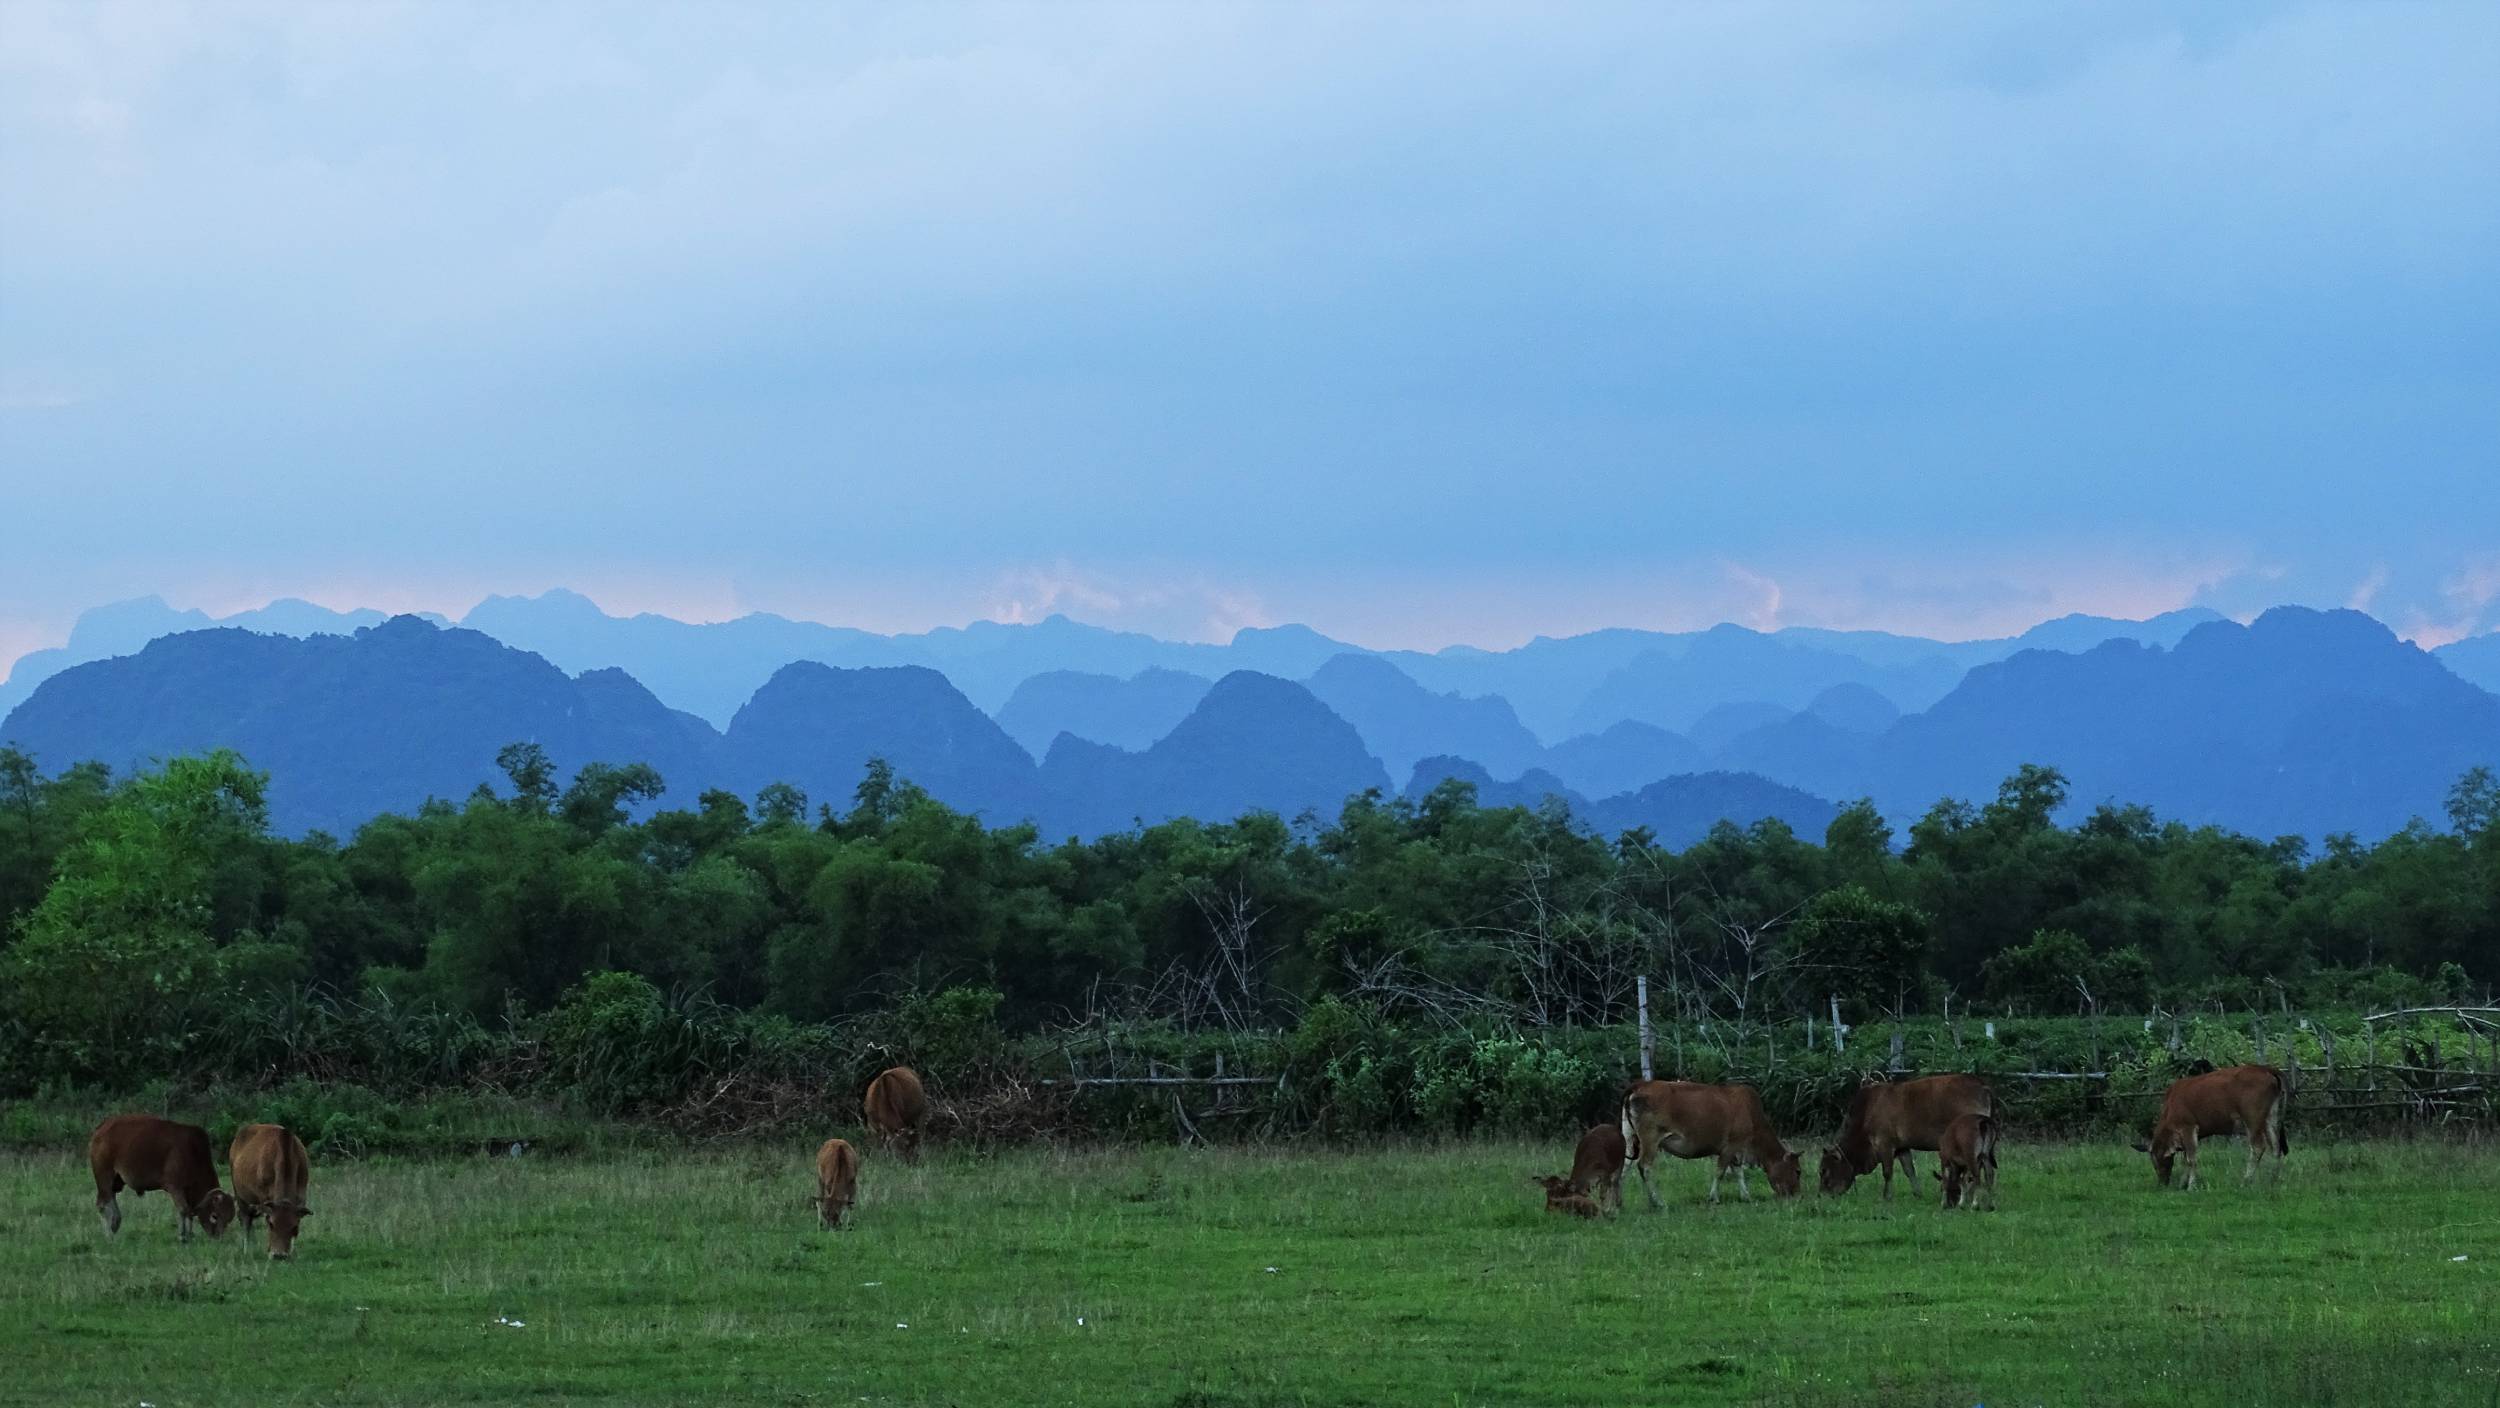 Cows grazing on the meadow and the rugged outline of the karst mountains in Phong Nha Ke Bang National Park in the background